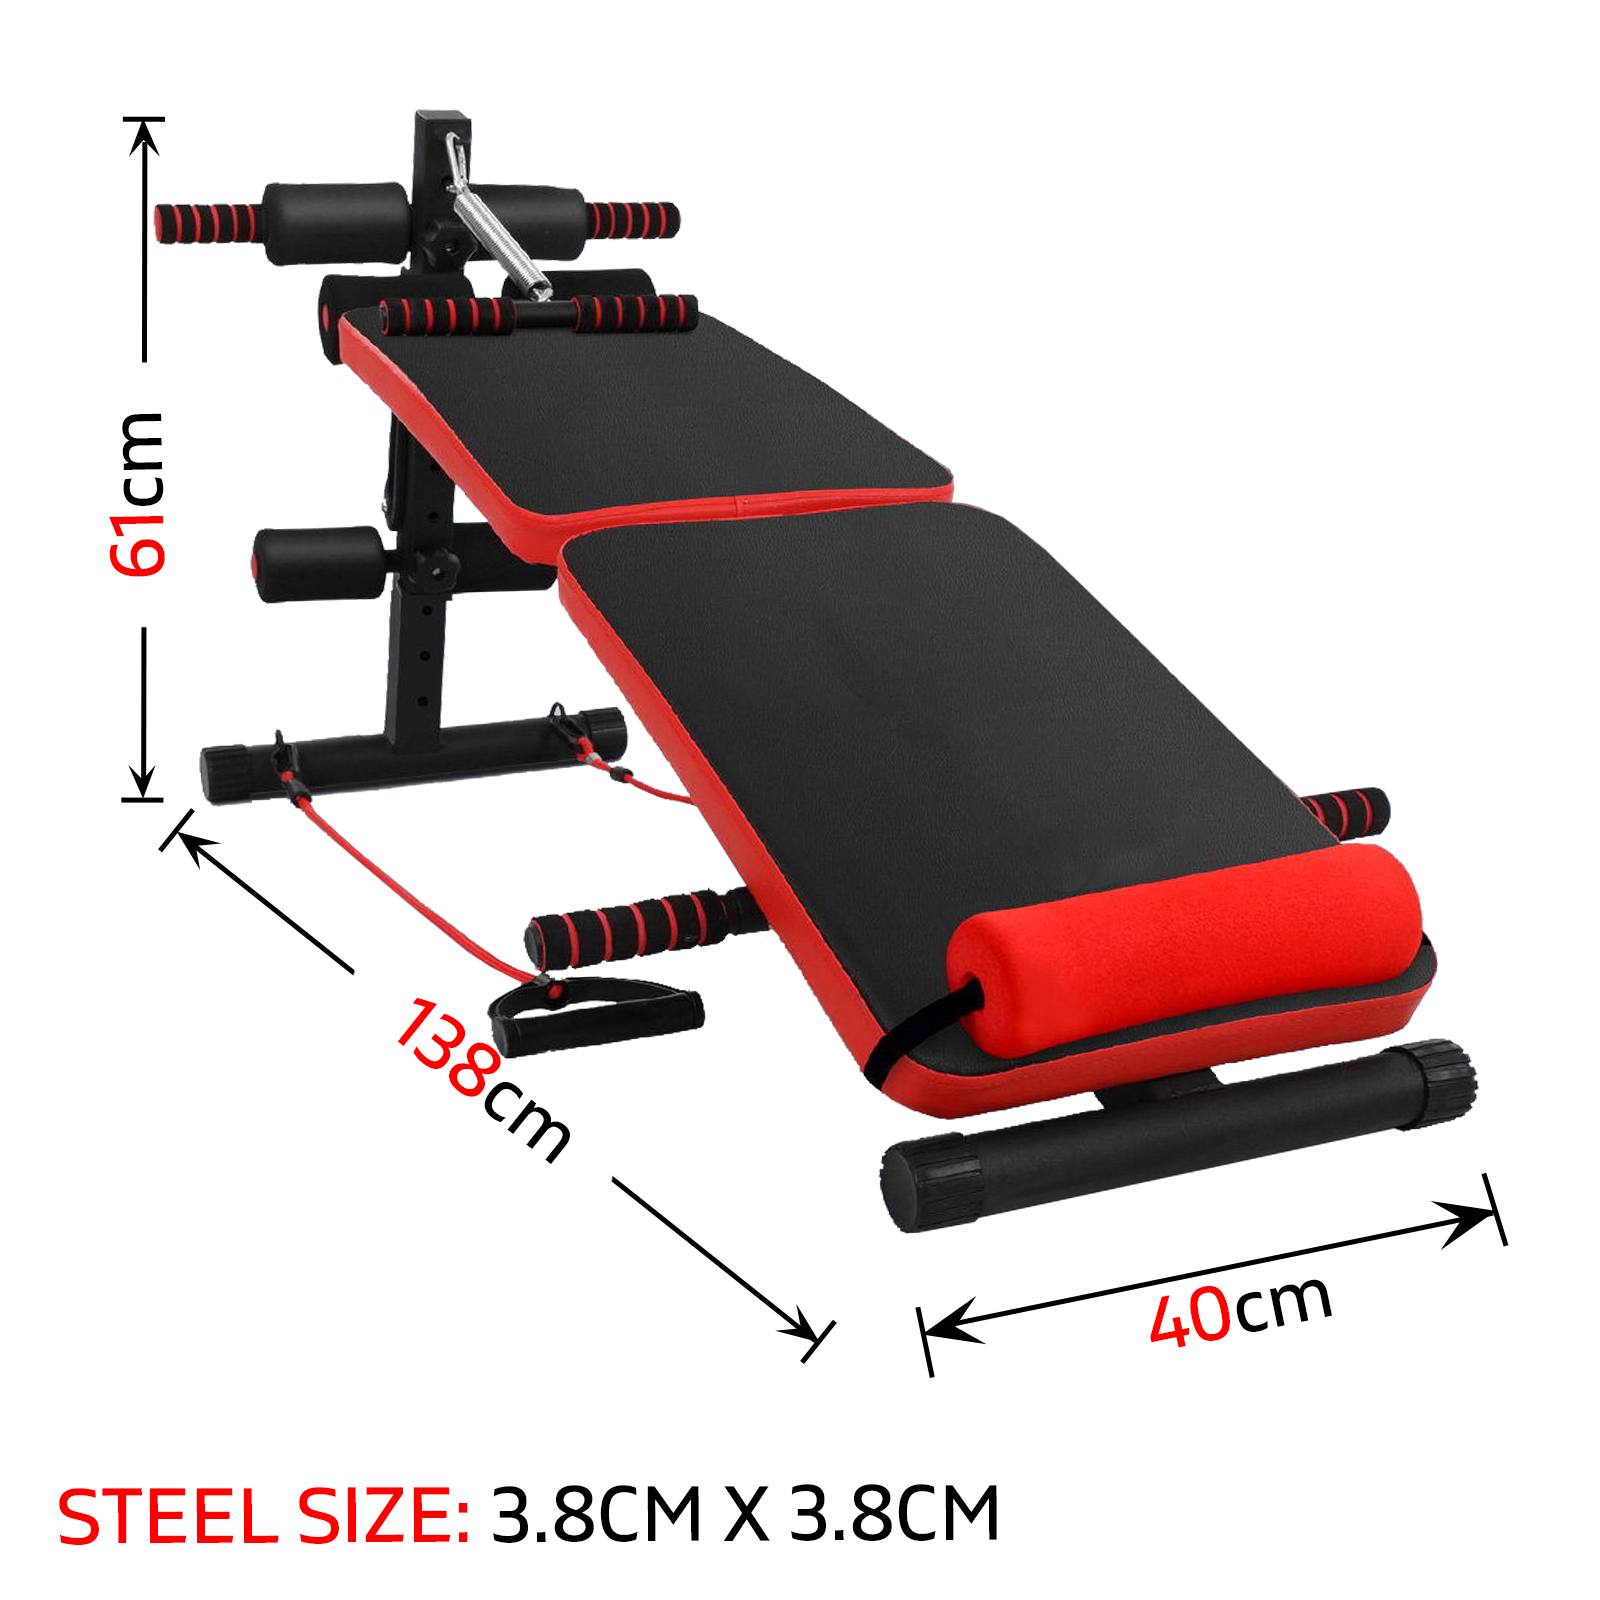 Adjustable Sit Up Bench Press Home Weight Exercise Gym Fitness Decline